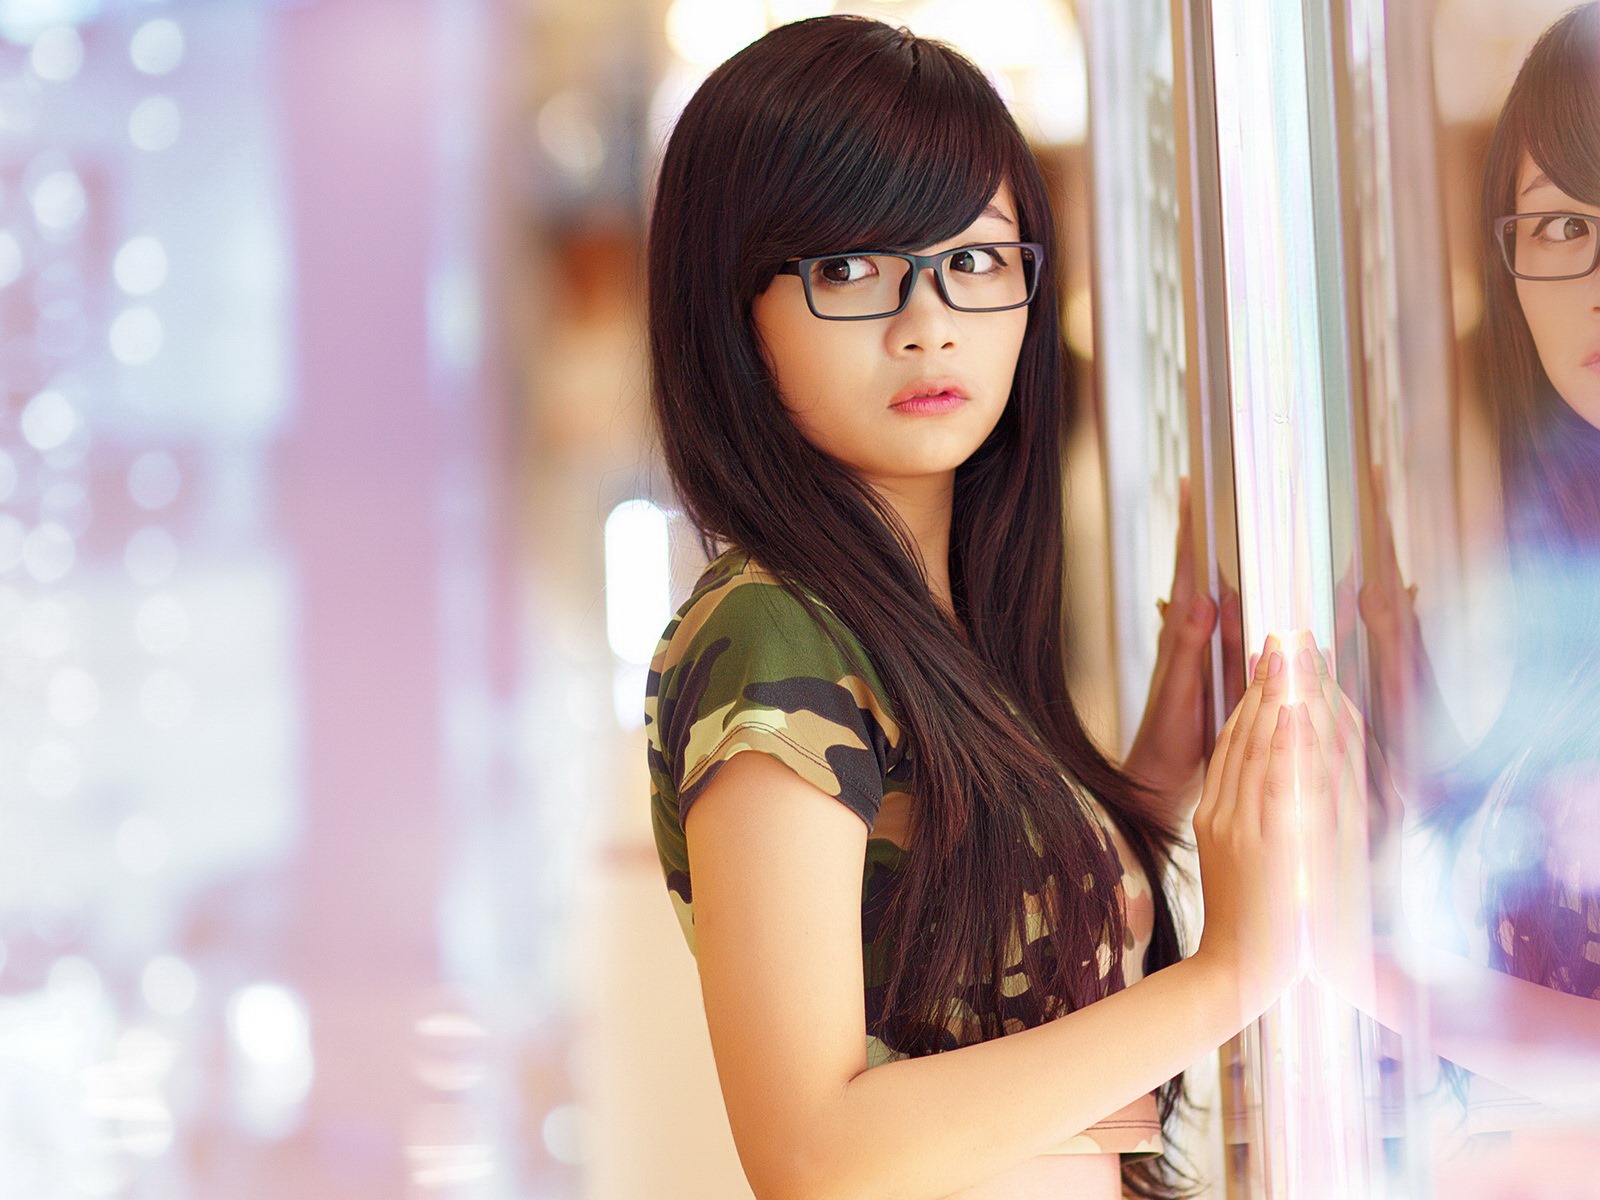 Pure and lovely young Asian girl HD wallpapers collection (3) #36 - 1600x1200